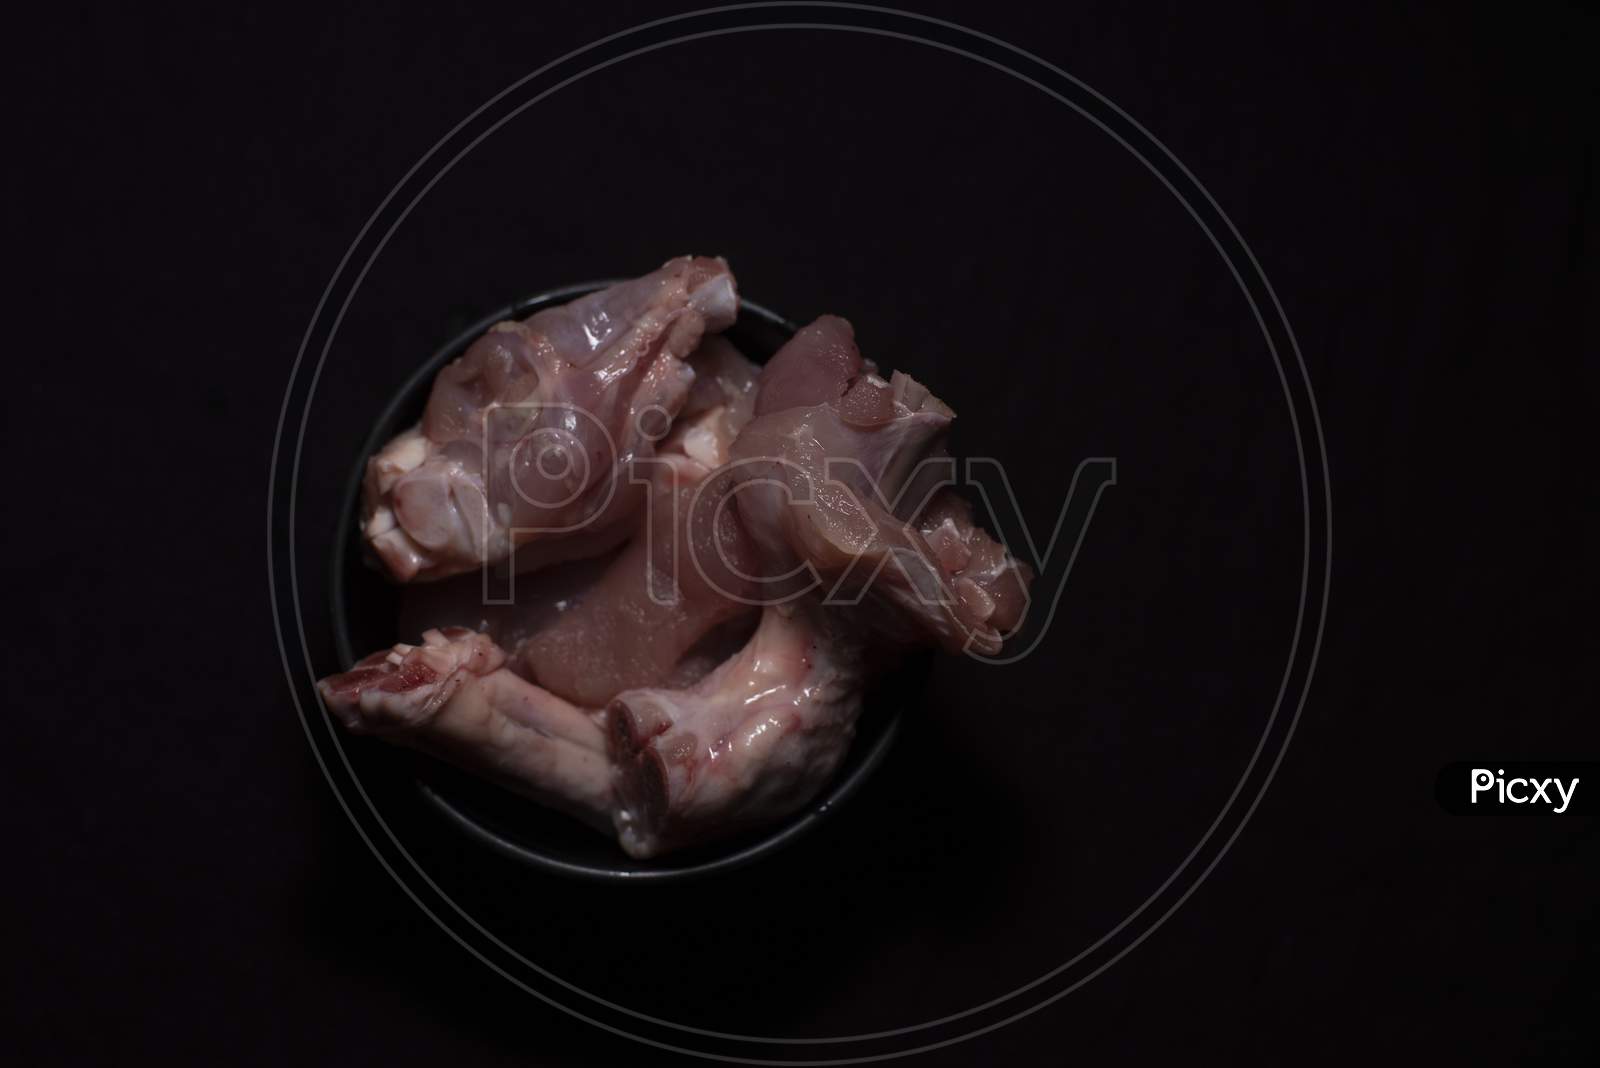 Top Down Image Of A Bowl Of Raw Chicken Pieces In A Dark Copy Space Background. Food And Product Photography.